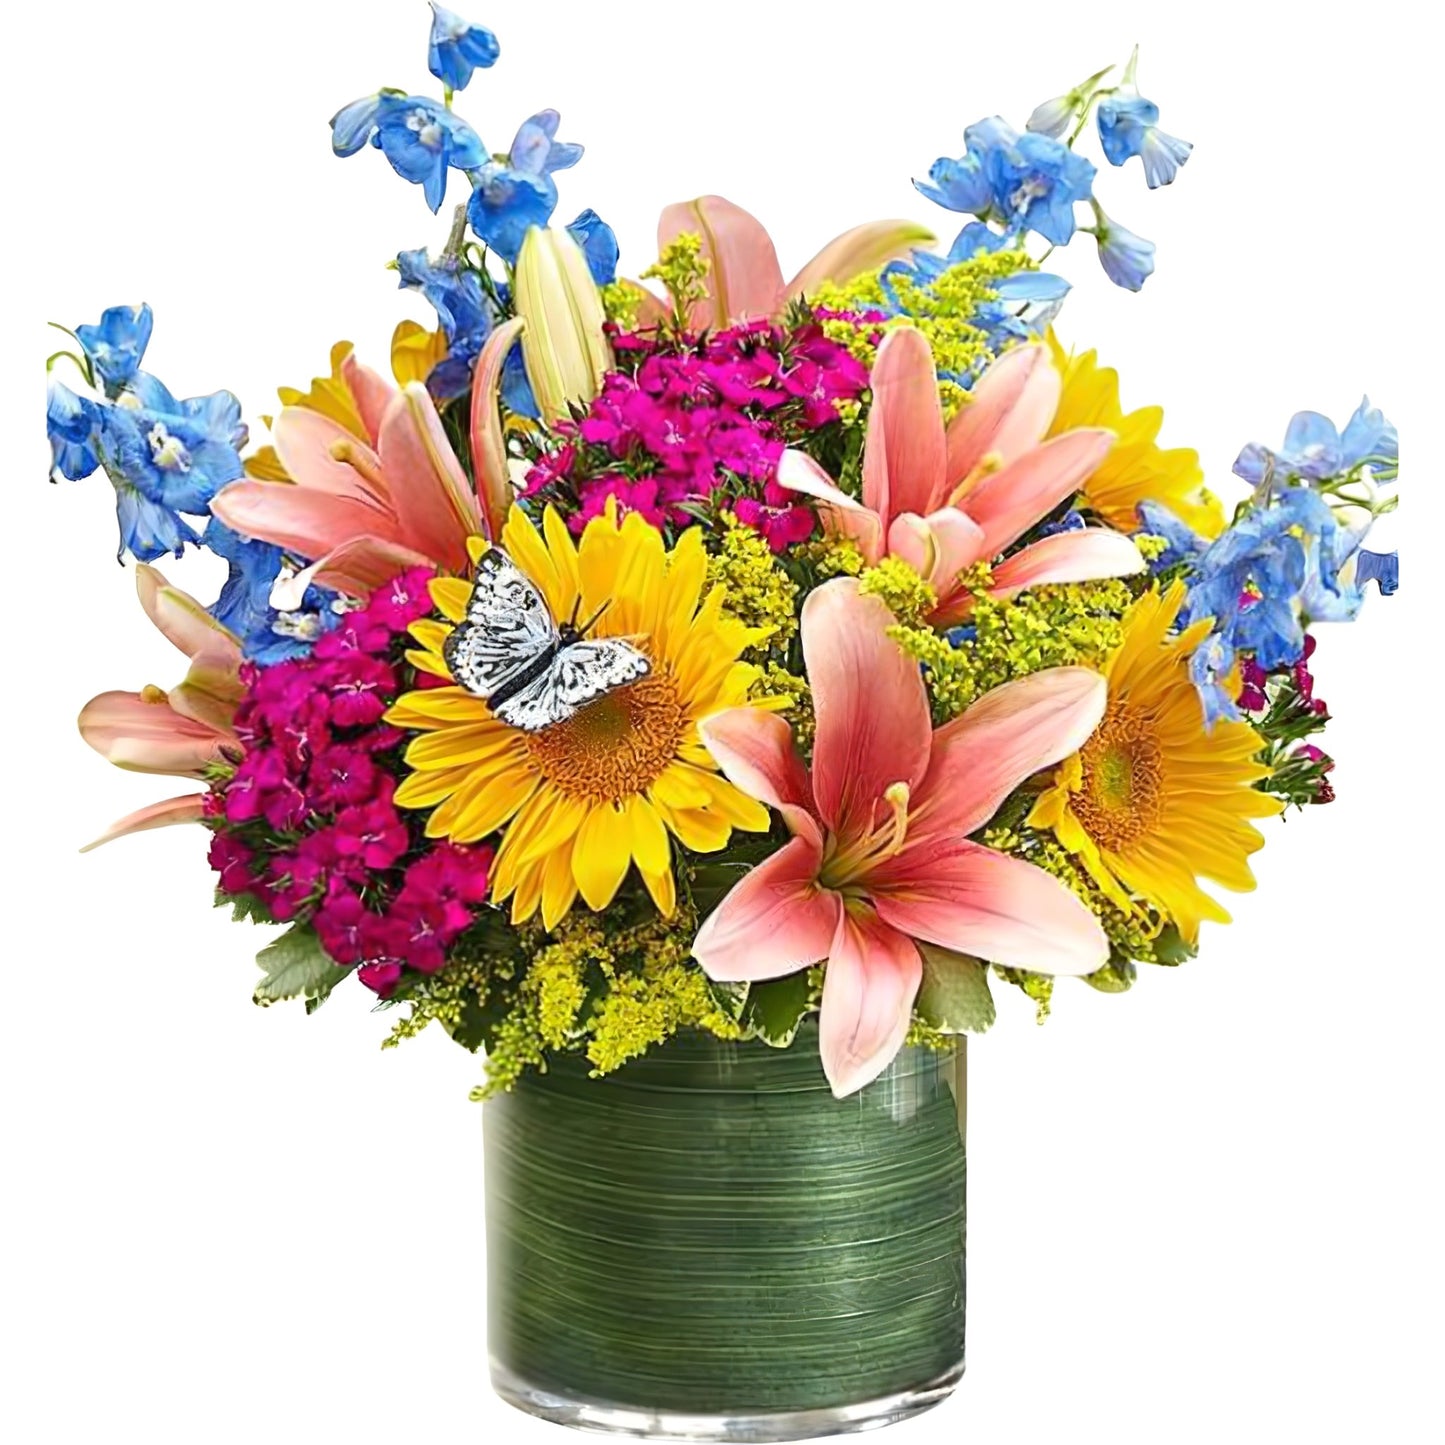 Simply Sophisticated - Fresh Cut Flowers - Queens Flower Delivery